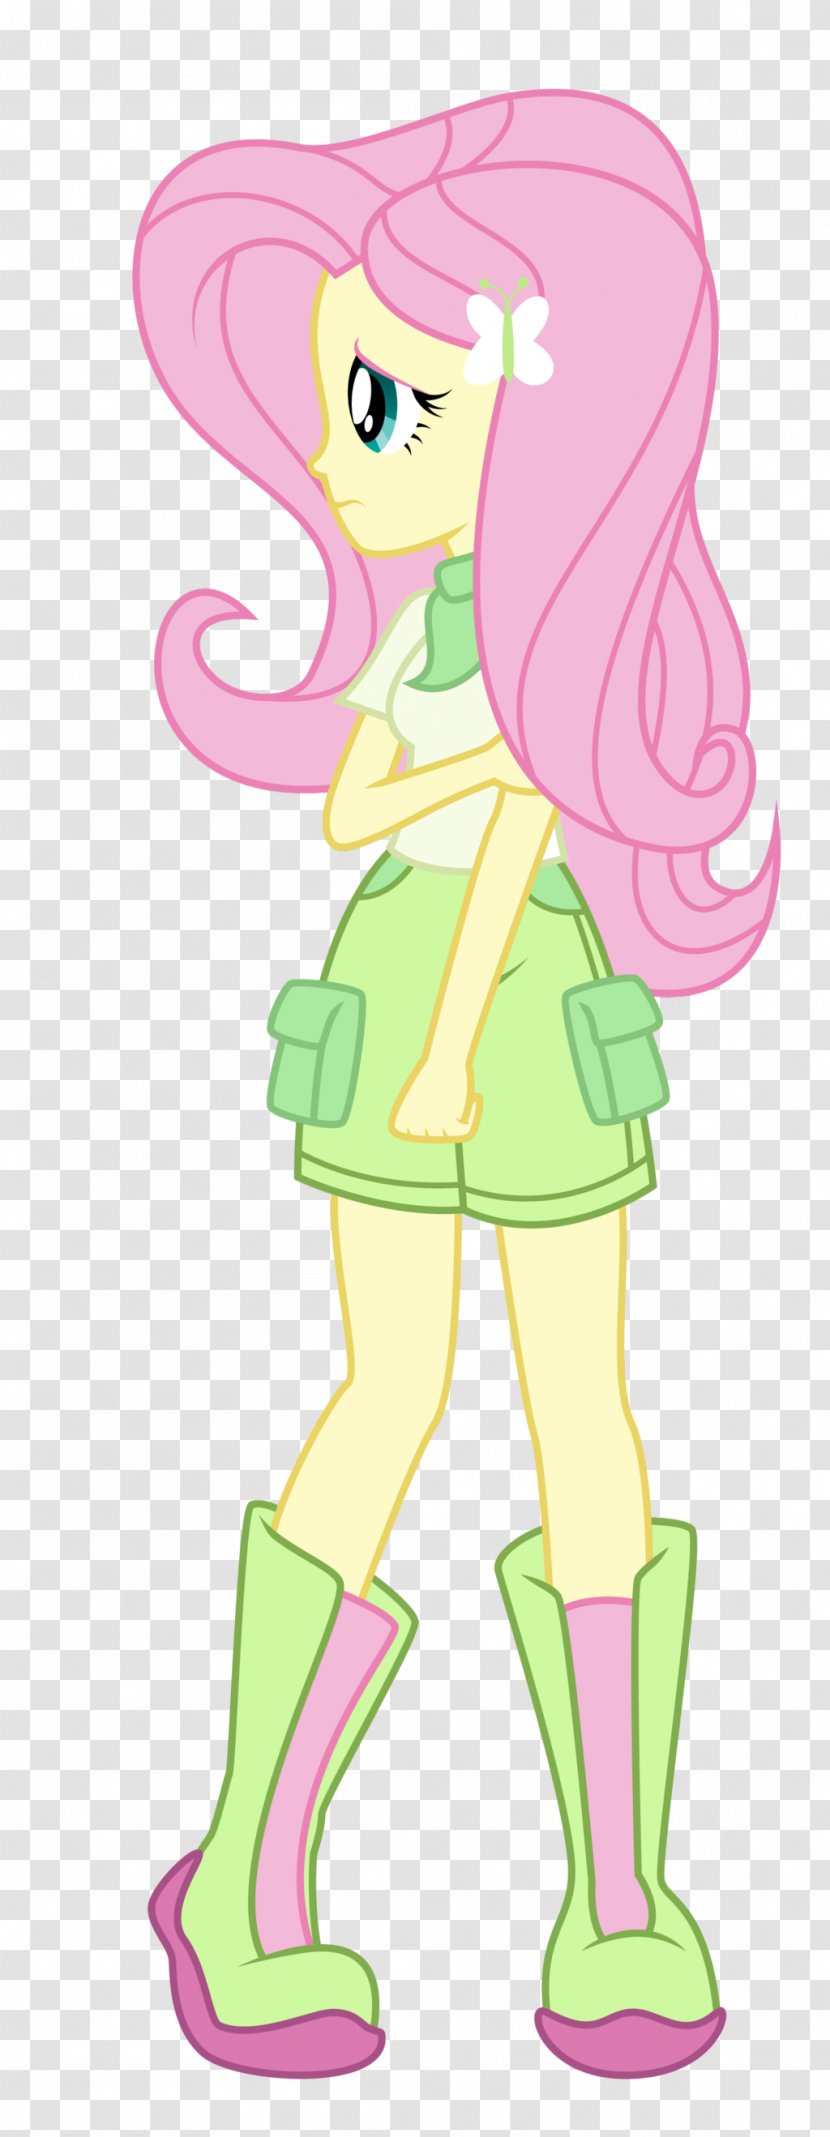 Fluttershy Pinkie Pie Rarity Twilight Sparkle My Little Pony: Equestria Girls - Heart - Sunlight Flare Transparent PNG